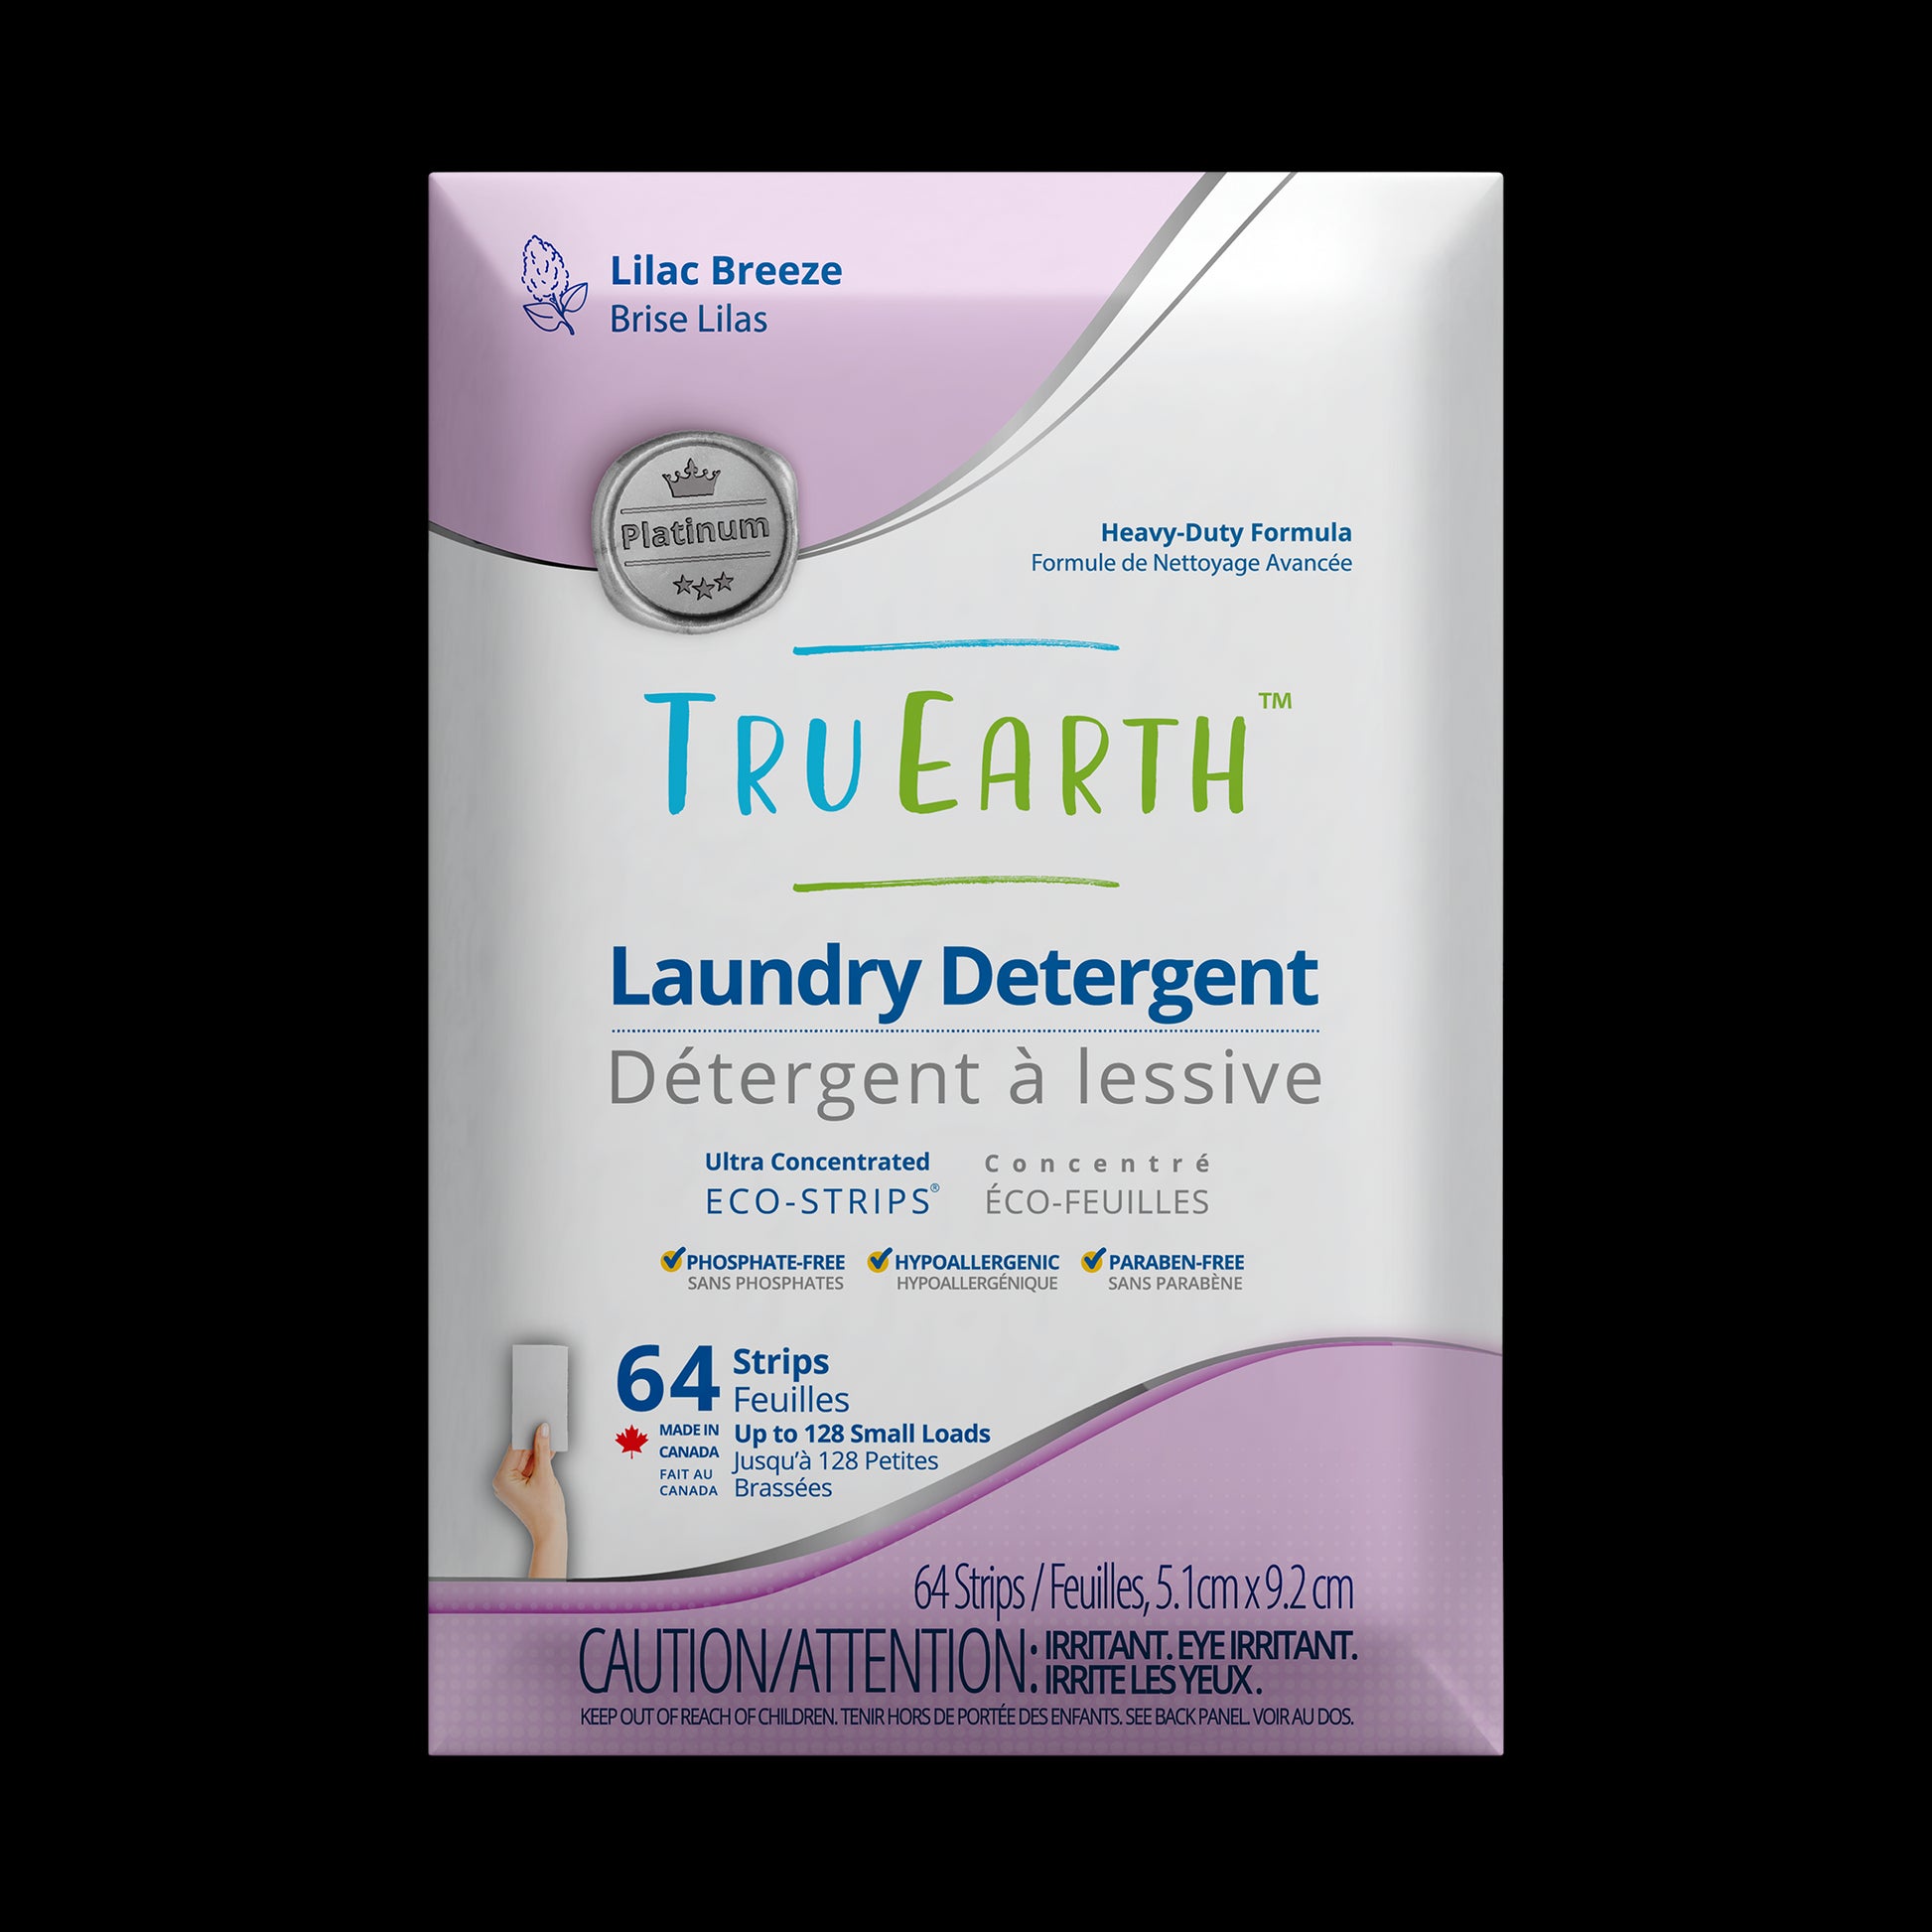 TruEarth Platinum Laundry Detergent Lilac Breeze Front of Package